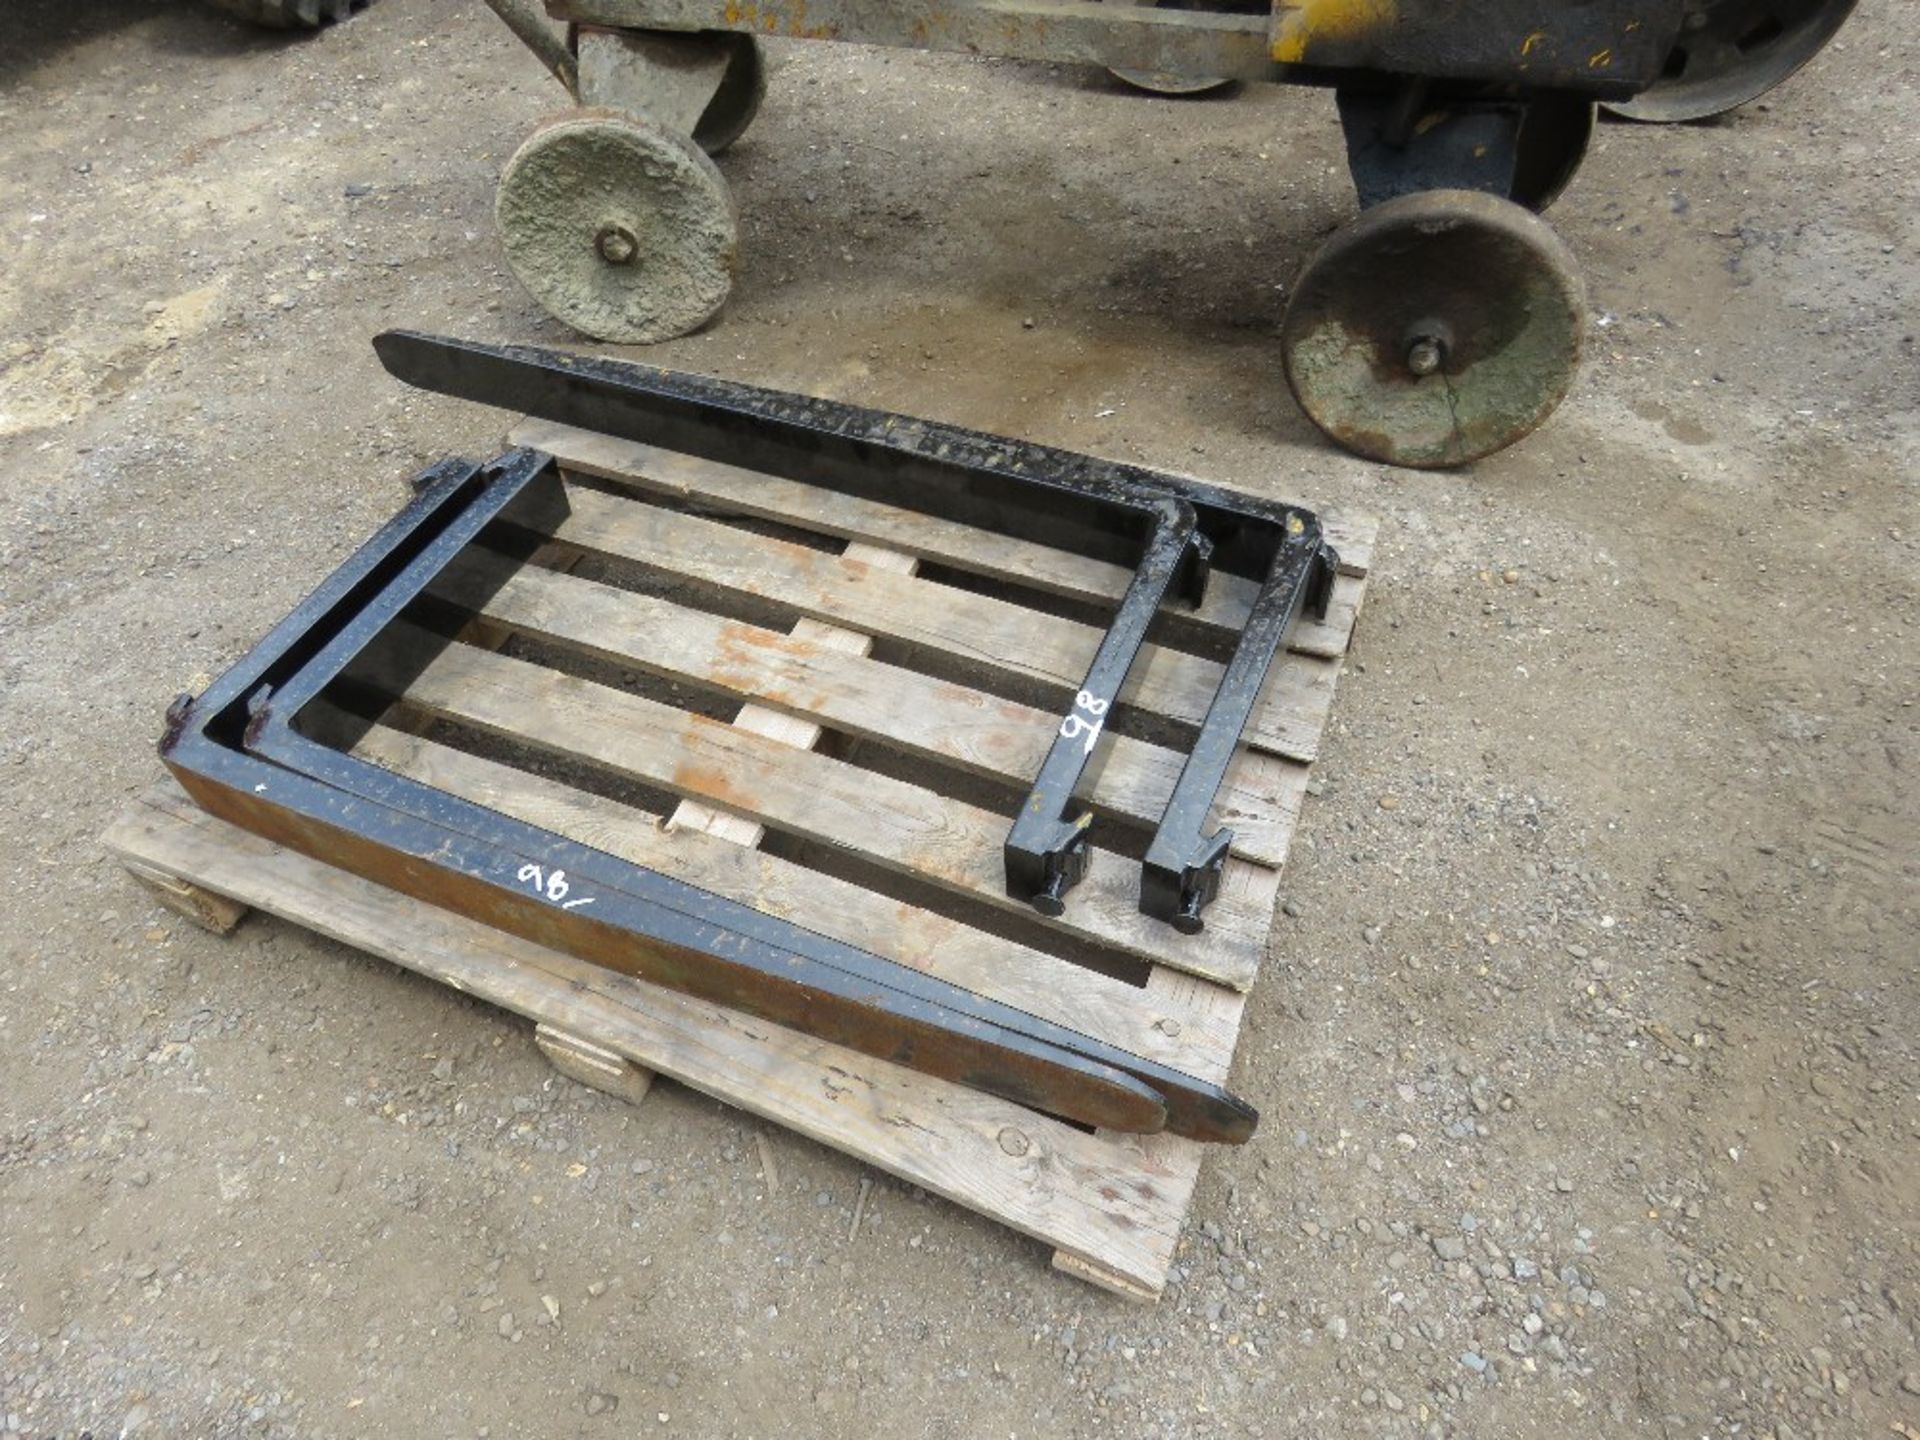 2X SET OF FORLIFT TINES FOR 16" CARRIAGE (UNTESTED)